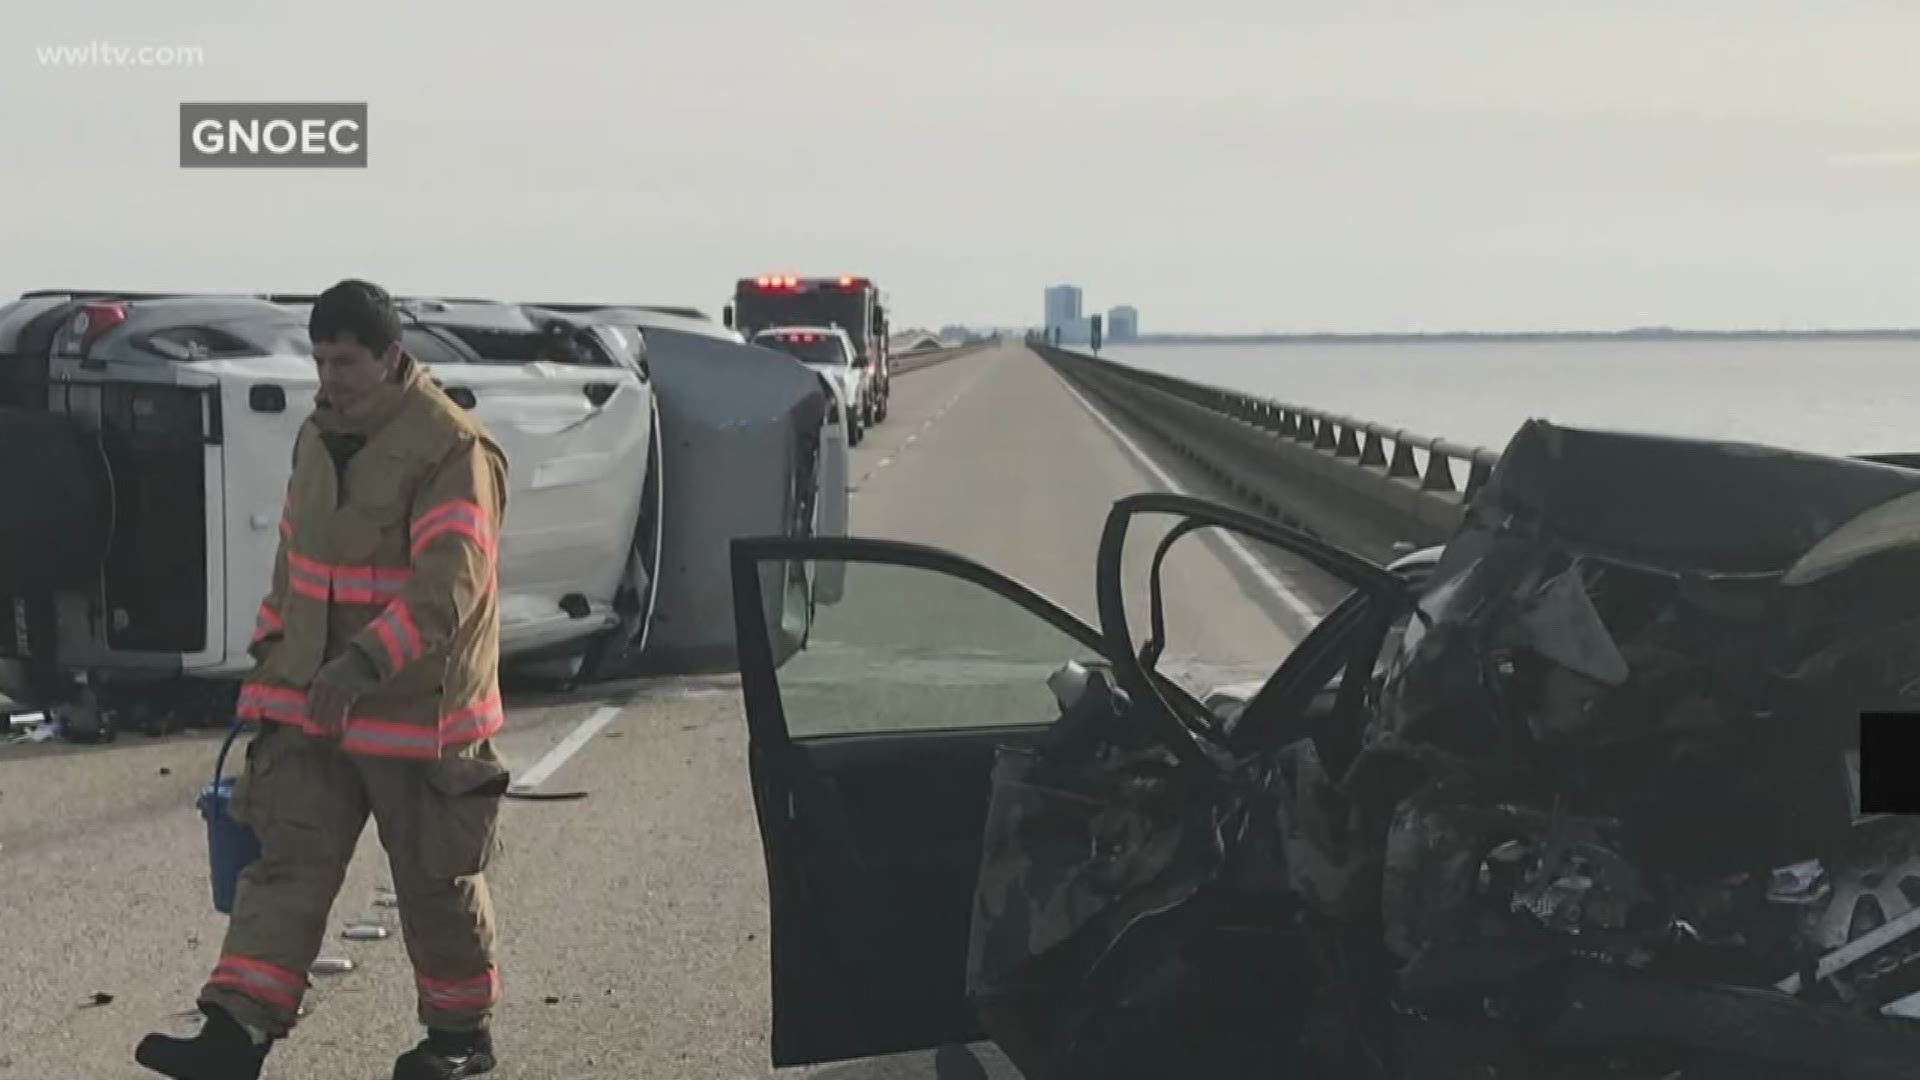 The southbound lanes of the Causeway were shut down by authorities for several hours Wednesday afternoon because of a fatal crash.